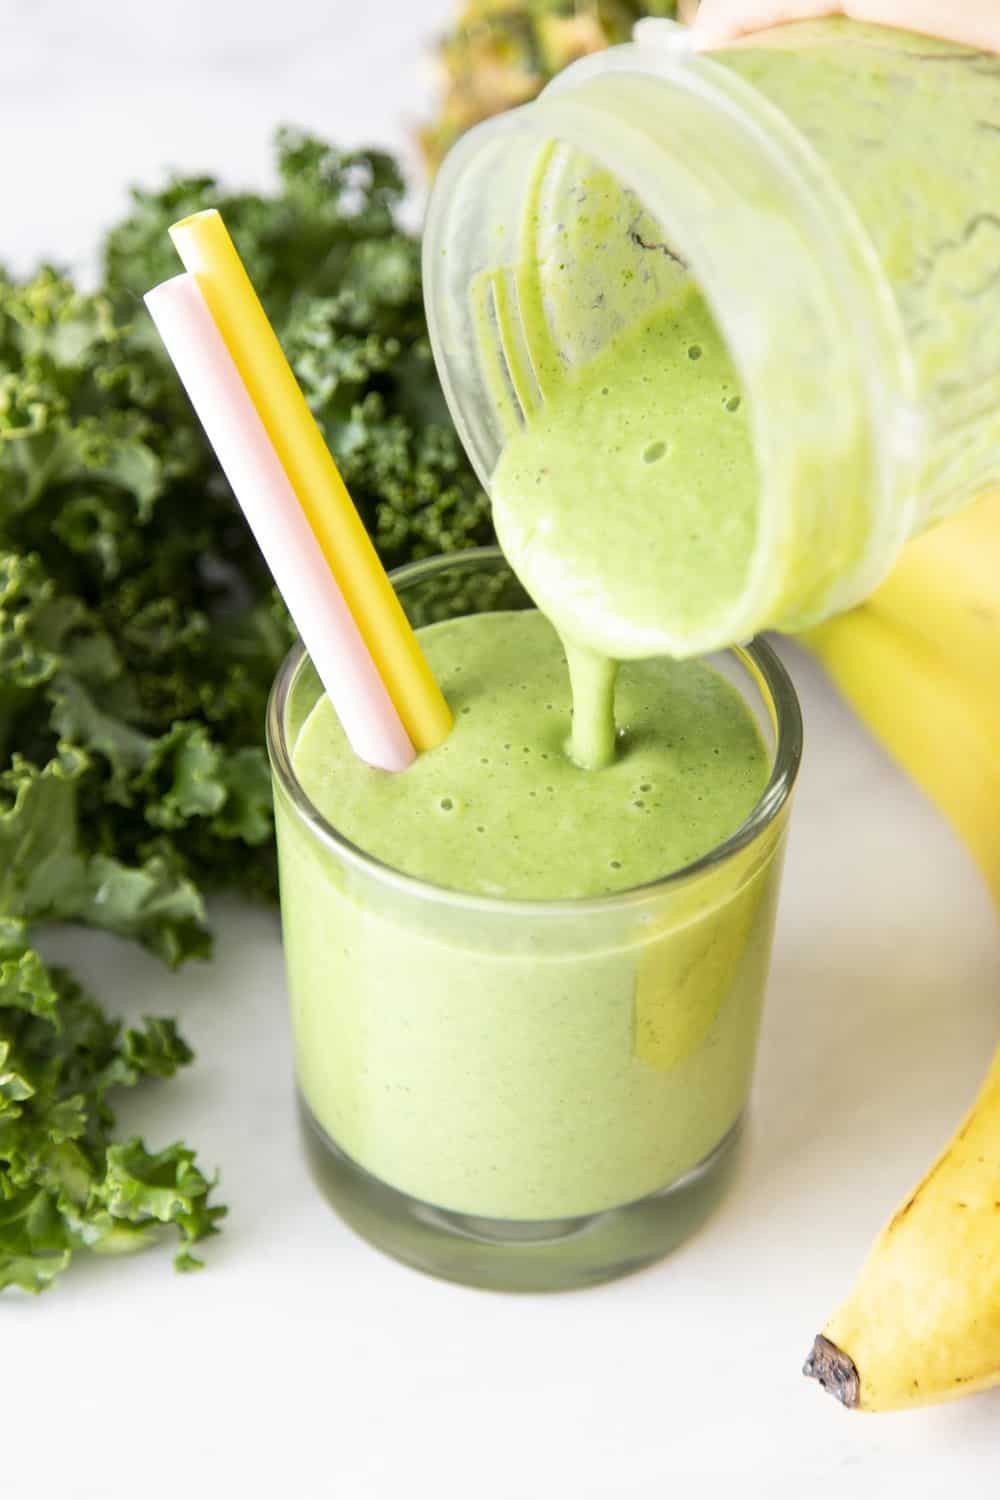 Kale smoothie being poured into a glass